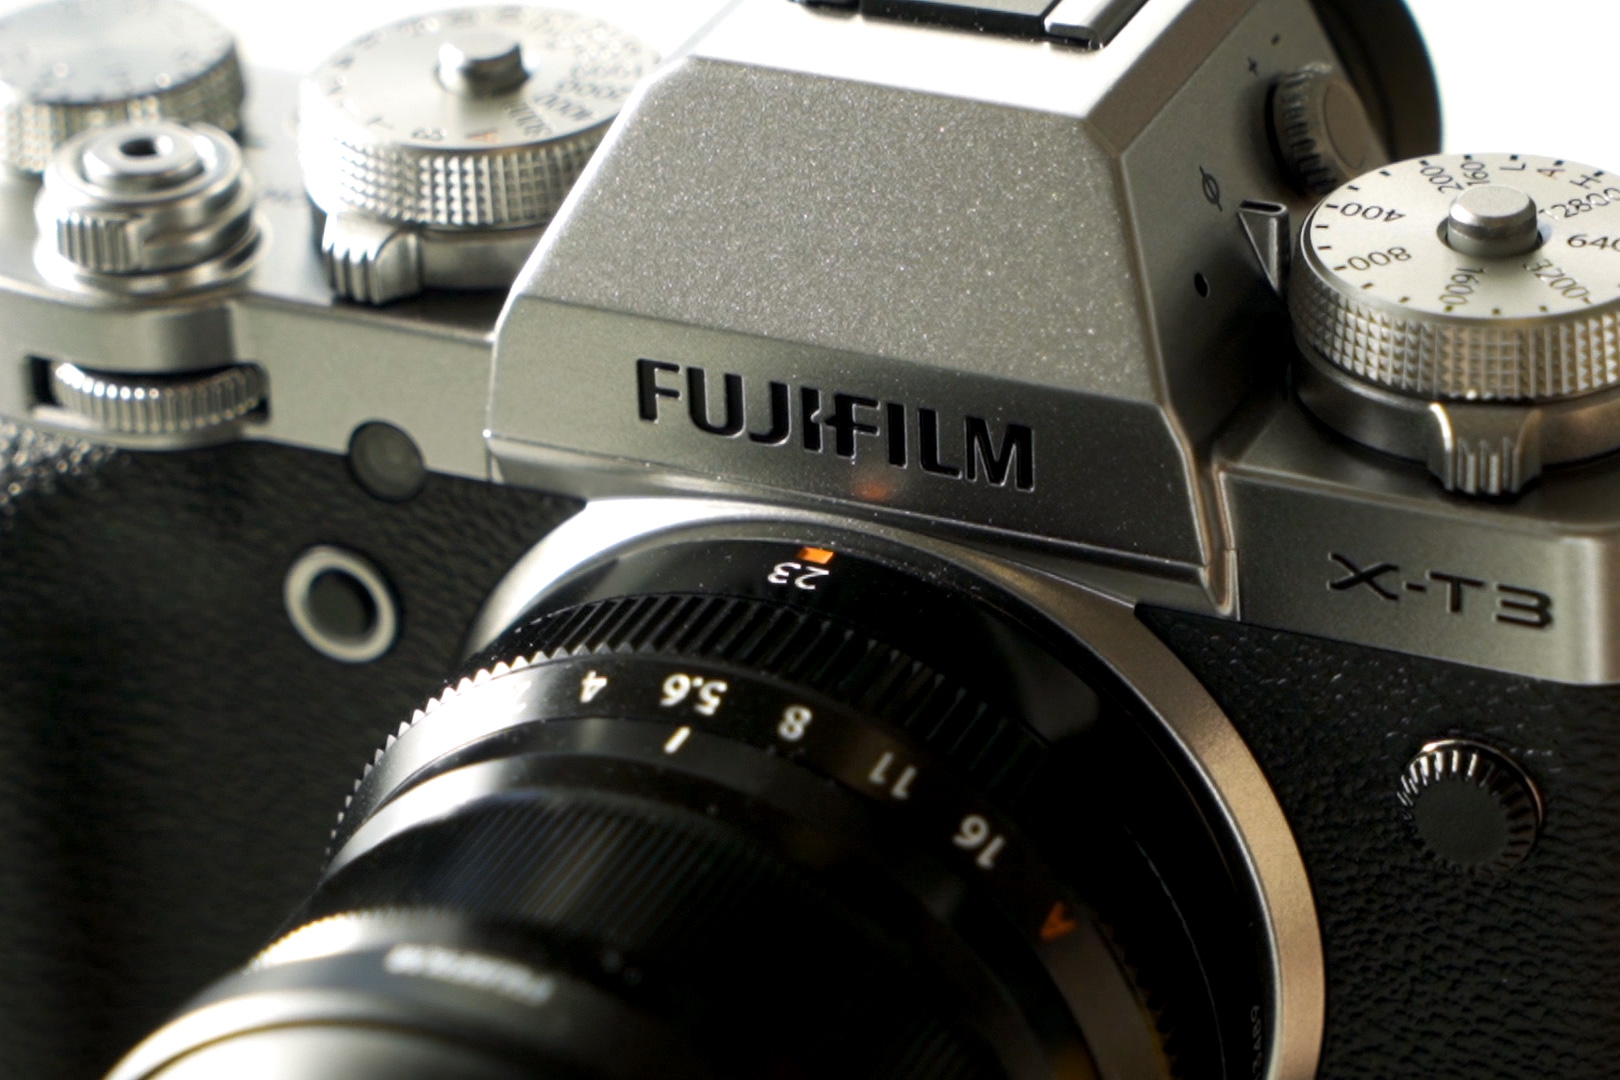 Fuji X-T3 Street Photography Review - Silver Camera